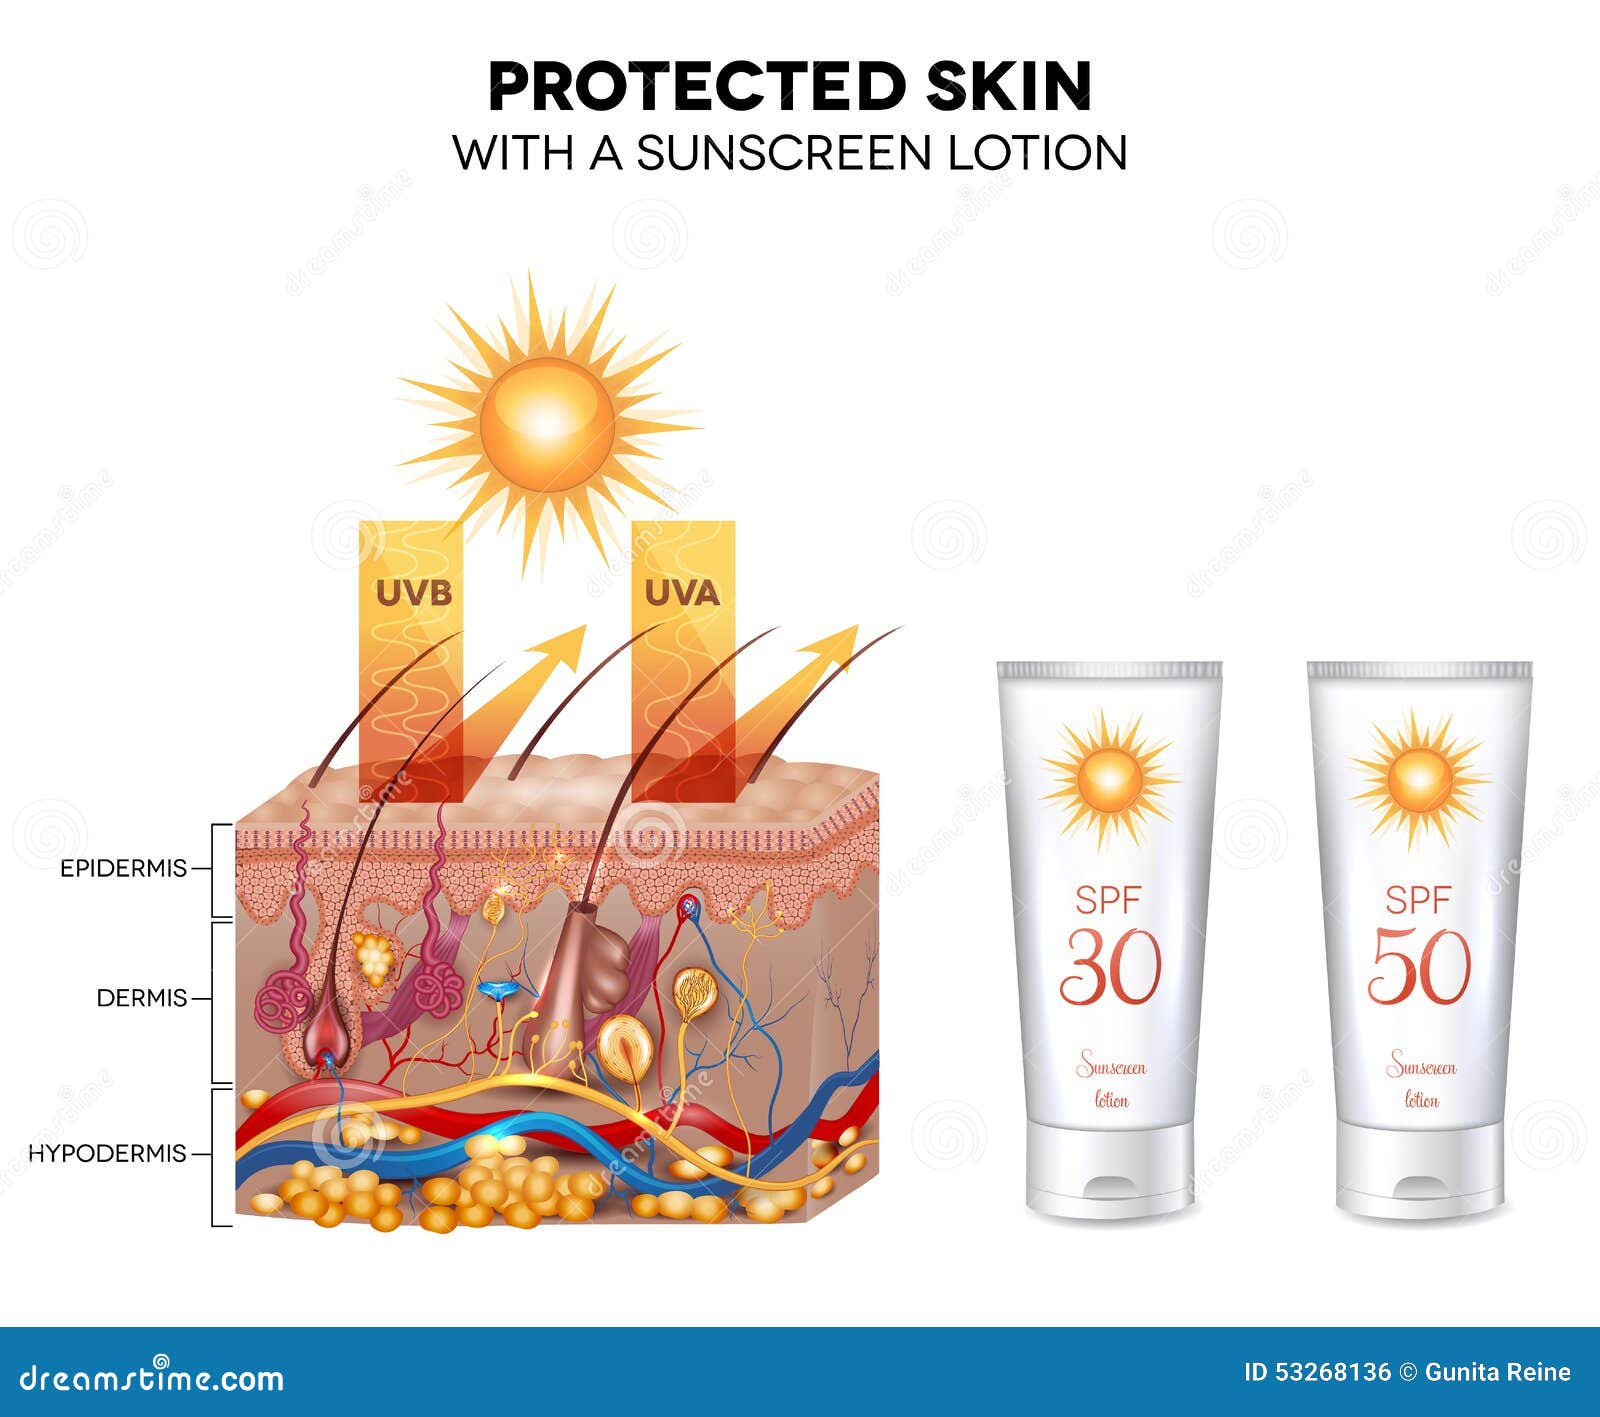 protected skin with a sunscreen lotion